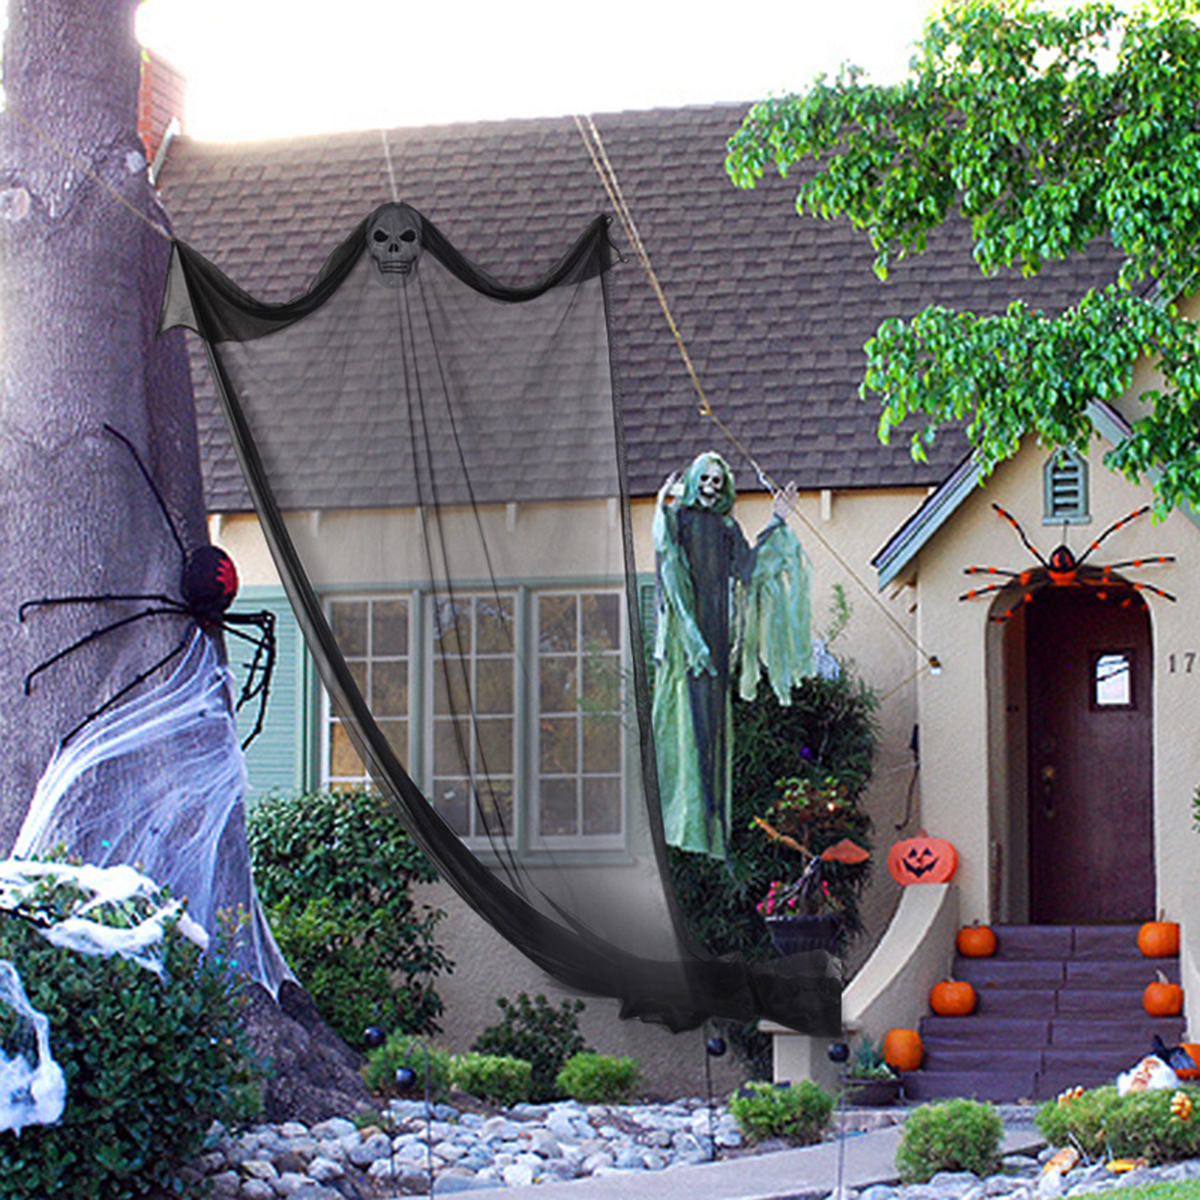 Halloween-Ghost-Decoration-Party-Hanging-Scary-Haunted-House-Prop-Indoor-Outdoor-1731519-6